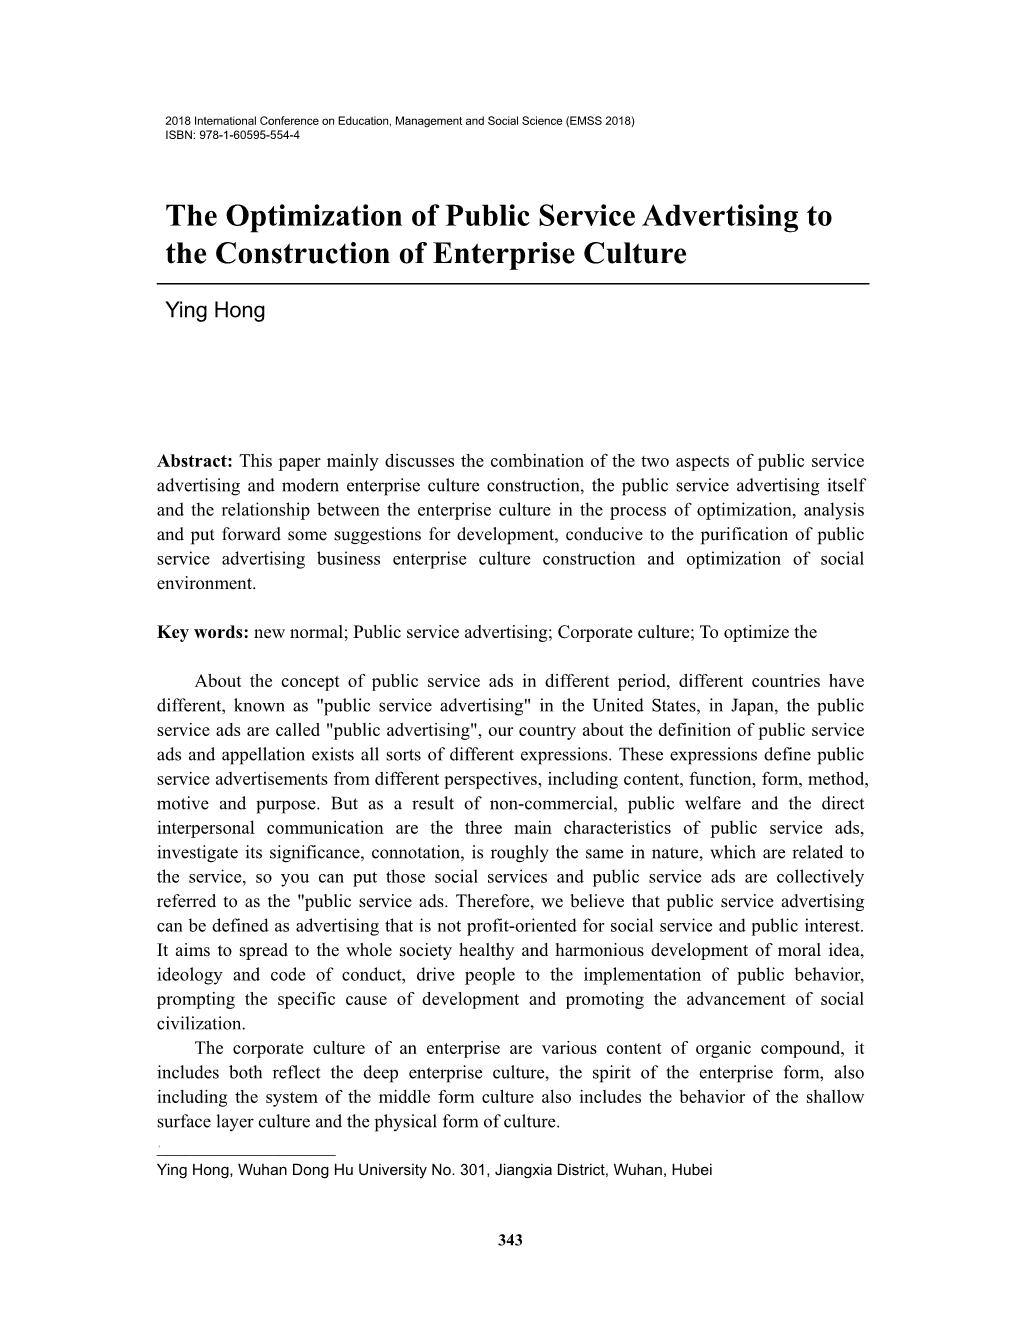 The Optimization of Public Service Advertising to the Construction Of